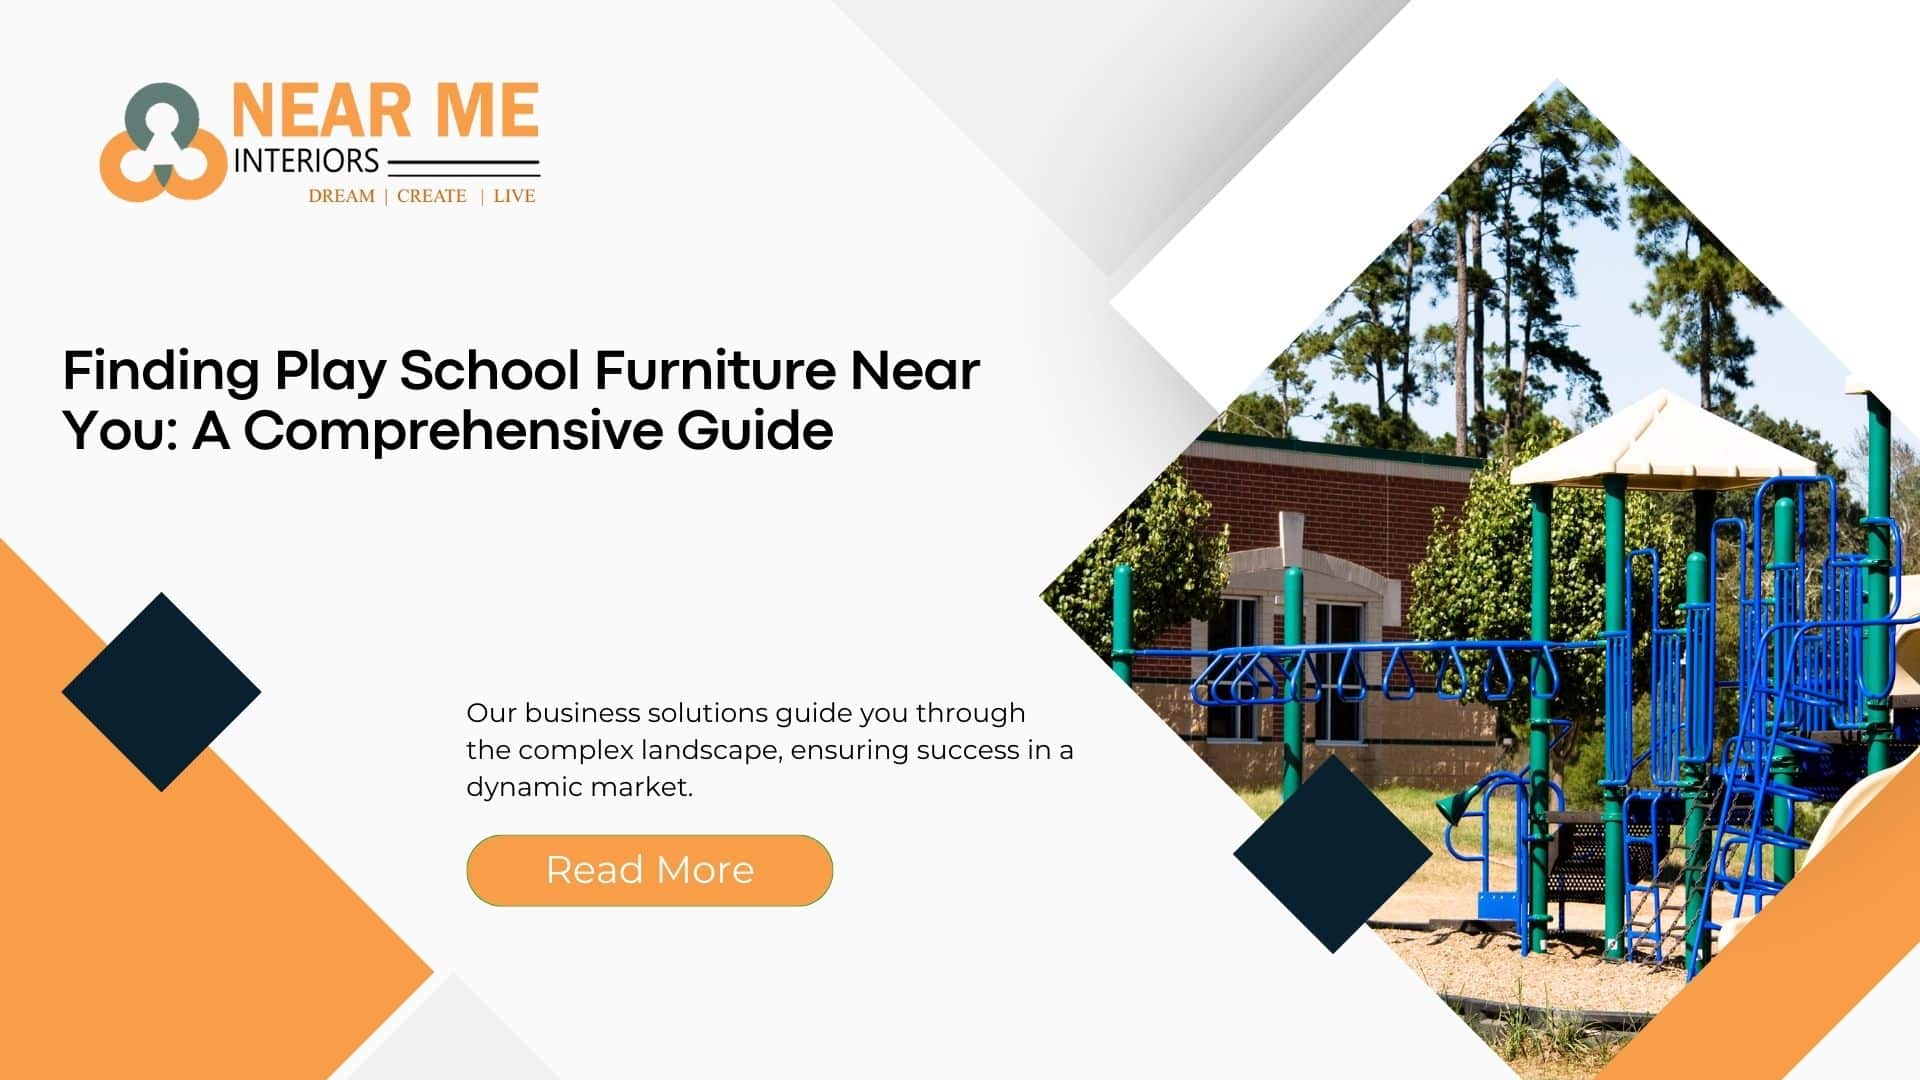 Finding Play School Furniture Near You: A Comprehensive Guide